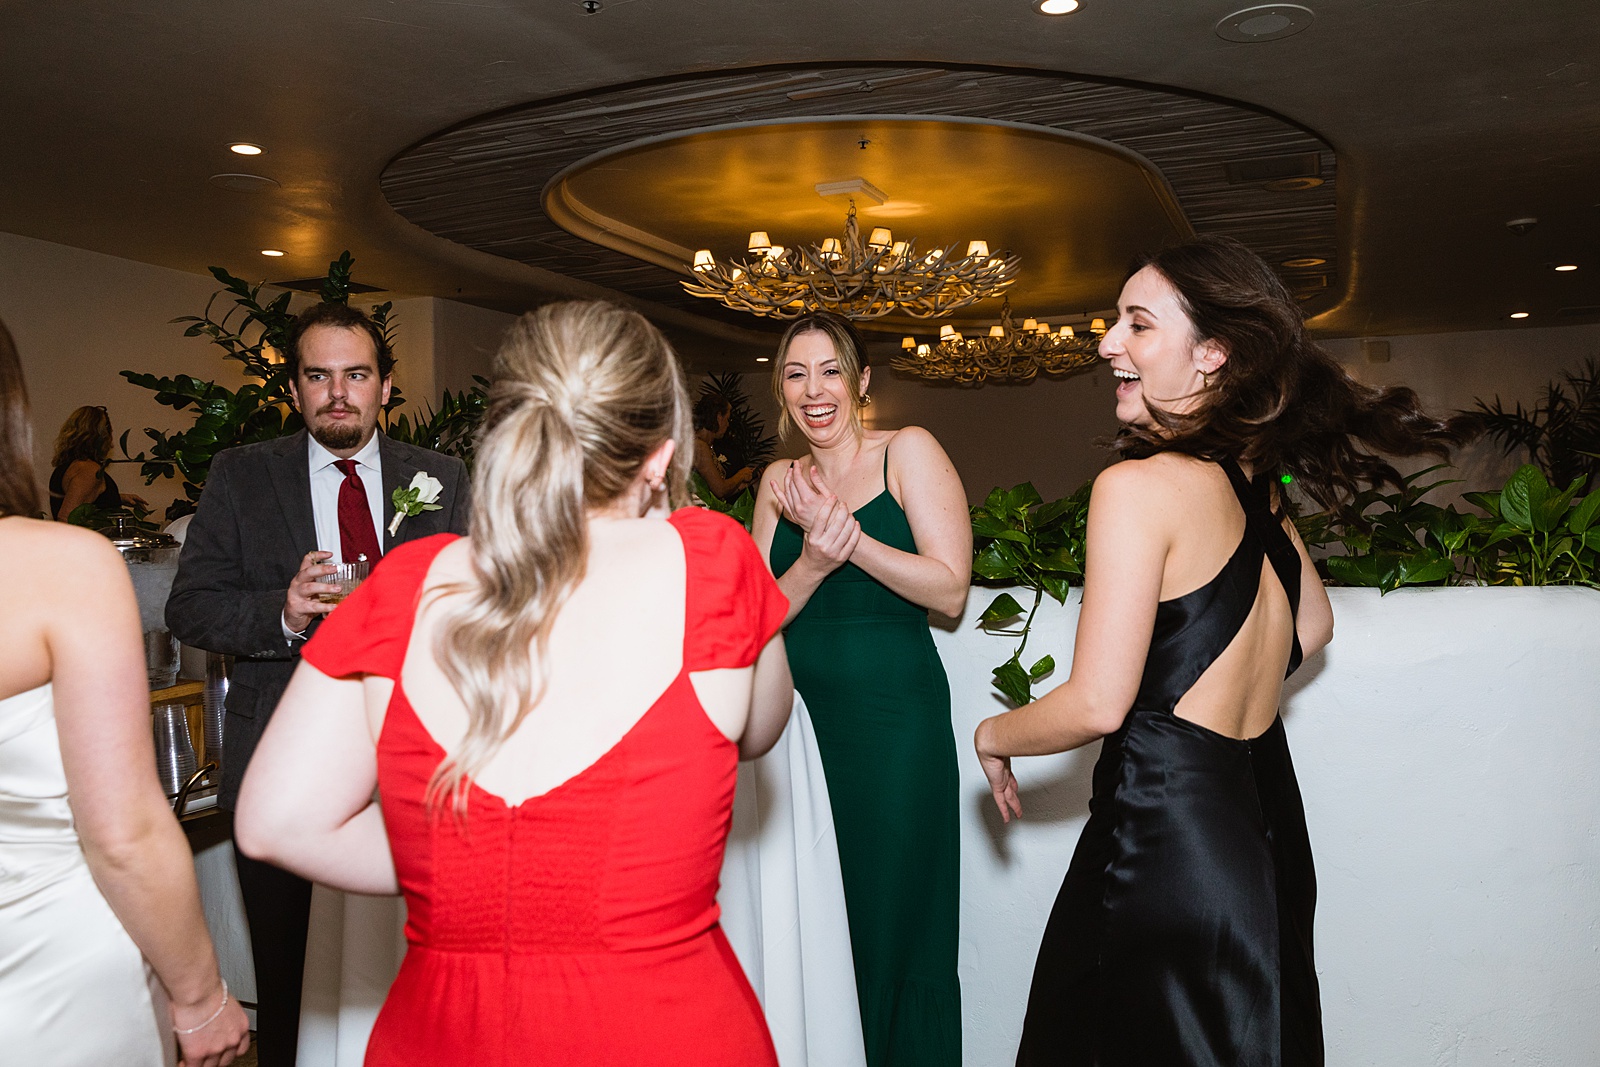 Guests together at The Scott wedding reception by Scottsdale wedding photographer PMA Photography